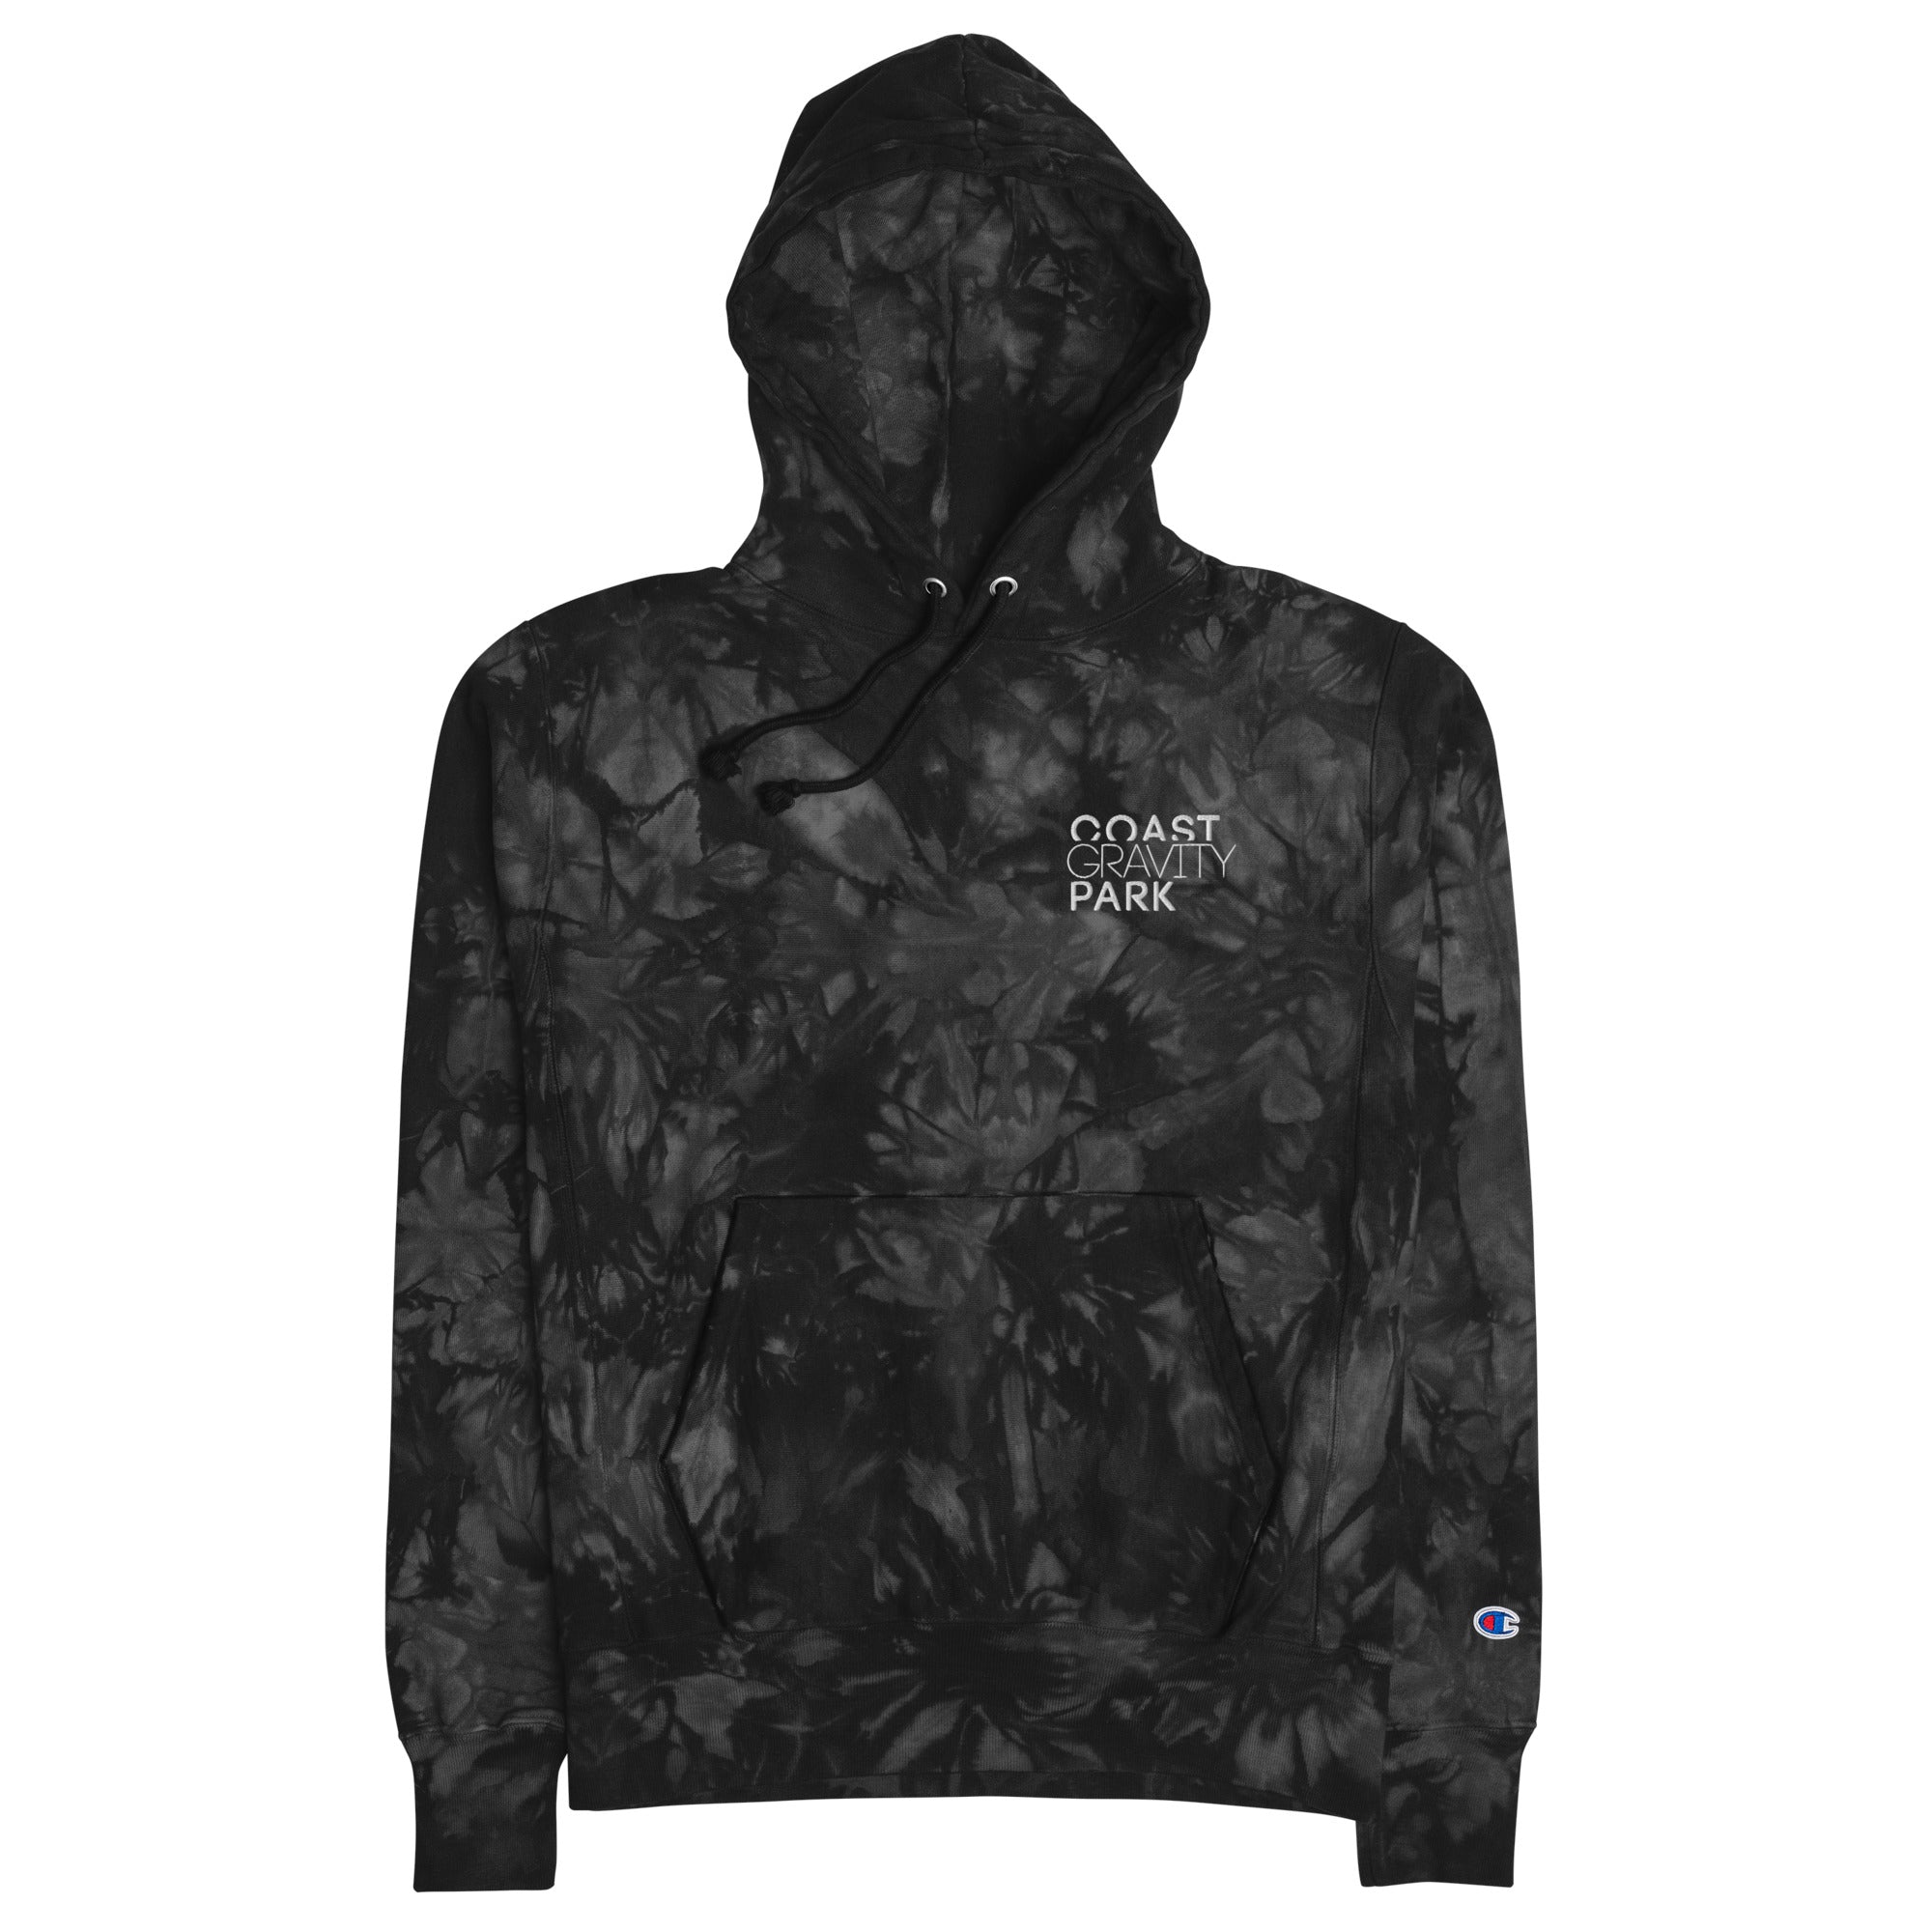 Justice System Hoodie – Incense, Trap, & Yoga